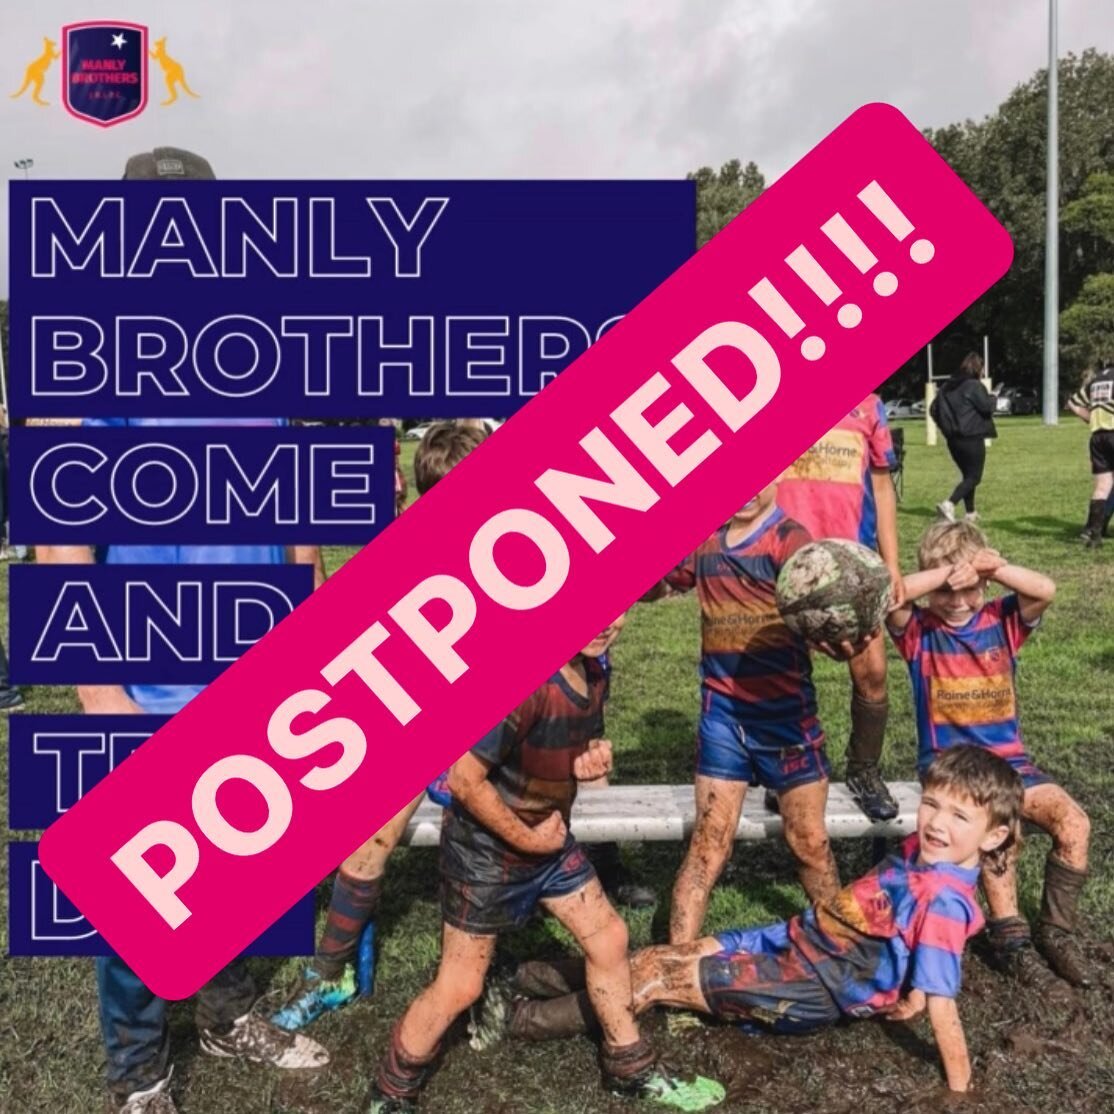 Unfortunately due to the heat all Junior Rugby League come and try sessions have been cancelled for this afternoon. 

We&rsquo;ll update everyone with a revised date once they have been announced. Stay hydrated peeps!! 🔥🧊